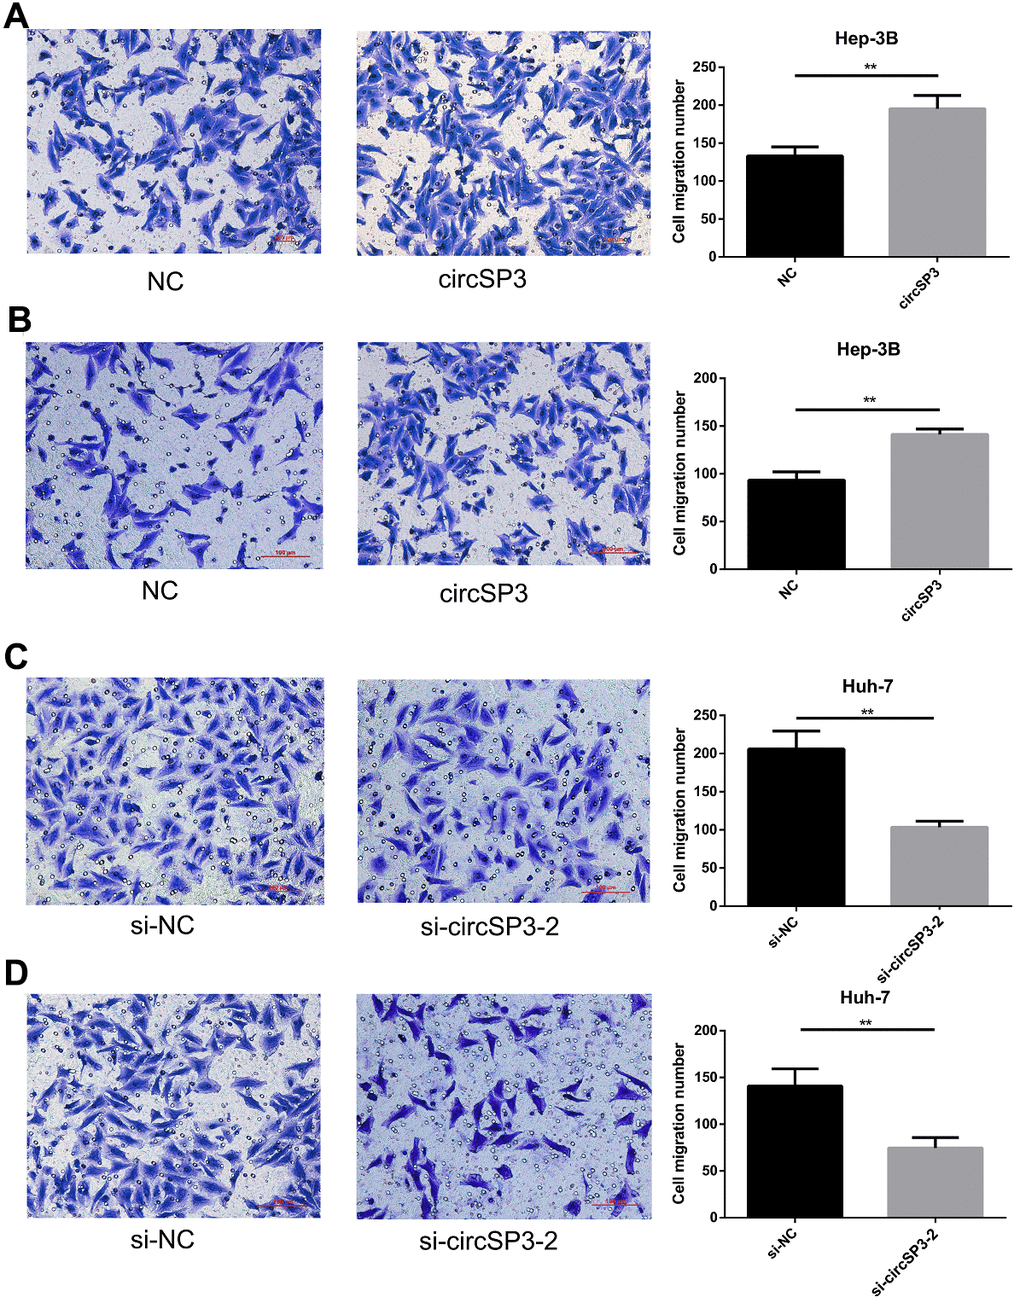 CircSP3 induced HCC cell migration and invasion in vitro. (A, B) Cell migration and invasion were assessed with Transwell assays in Hep-3B cells infected with circSP3 or NC plasmids. (C, D). Transwell assays were carried out to assess cell migration and invasion when circSP3 was downregulated in Huh-7 cells. **p